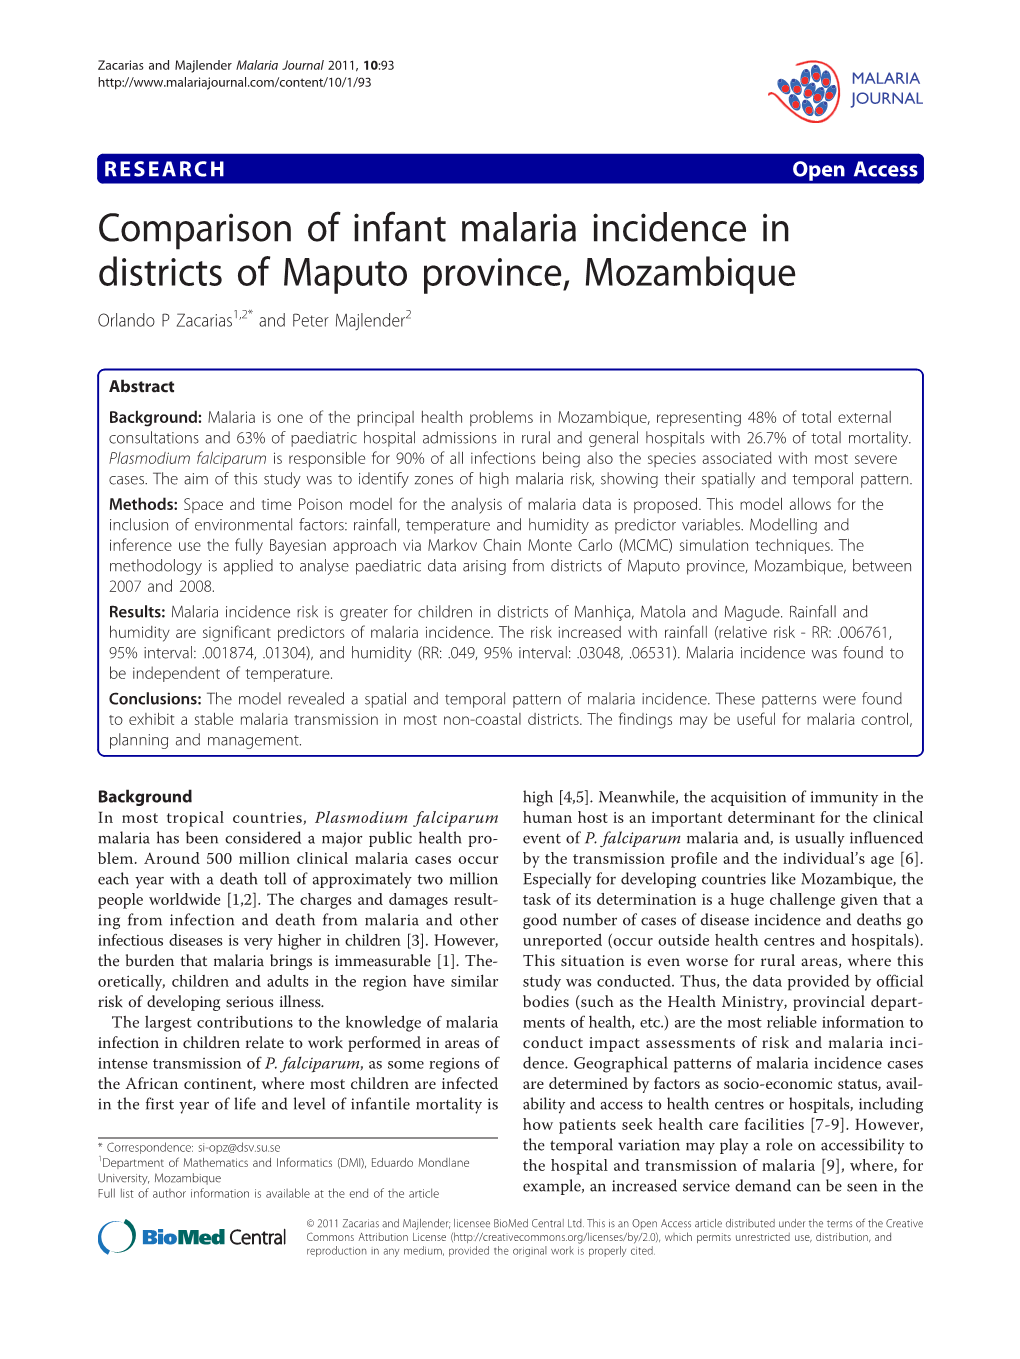 Comparison of Infant Malaria Incidence in Districts of Maputo Province, Mozambique Orlando P Zacarias1,2* and Peter Majlender2